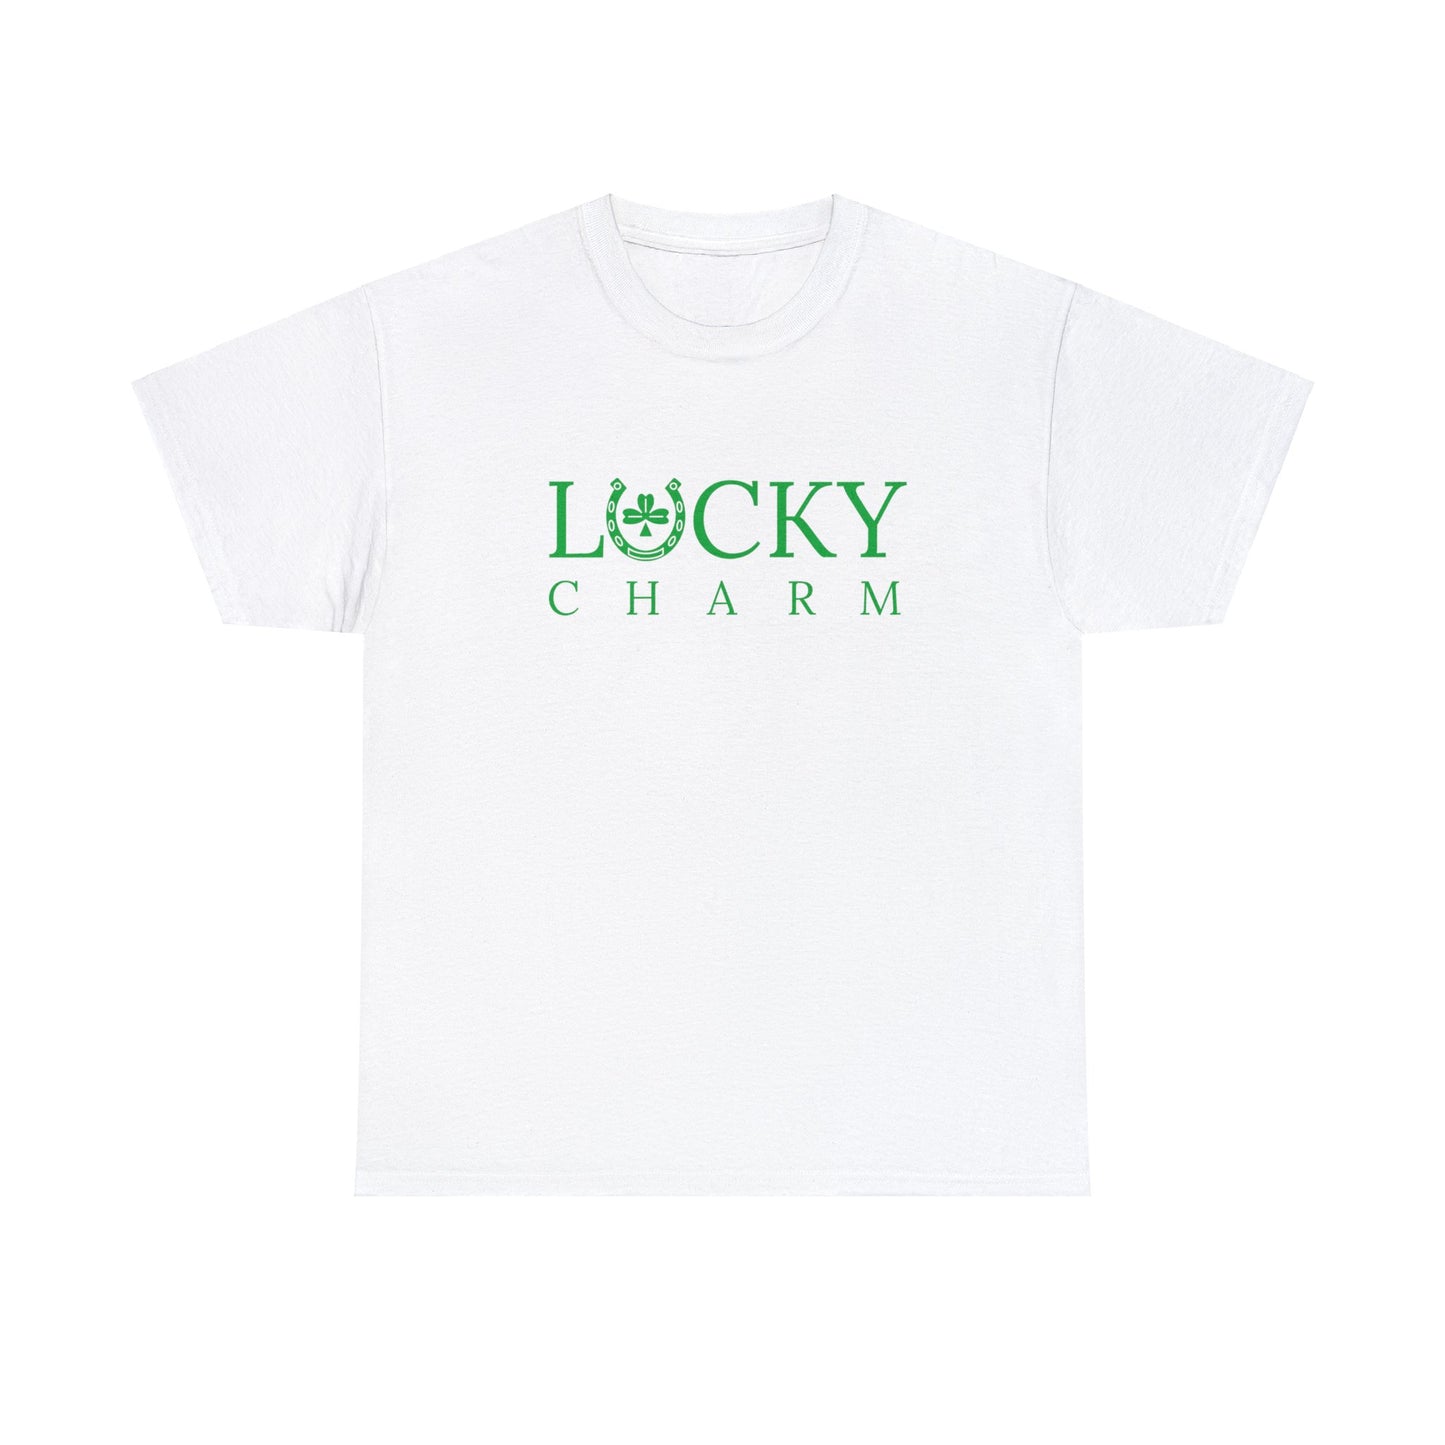 Lucky Charm T-Shirt For St. Patrick's Day TShirt for St. Paddy's Day Tee